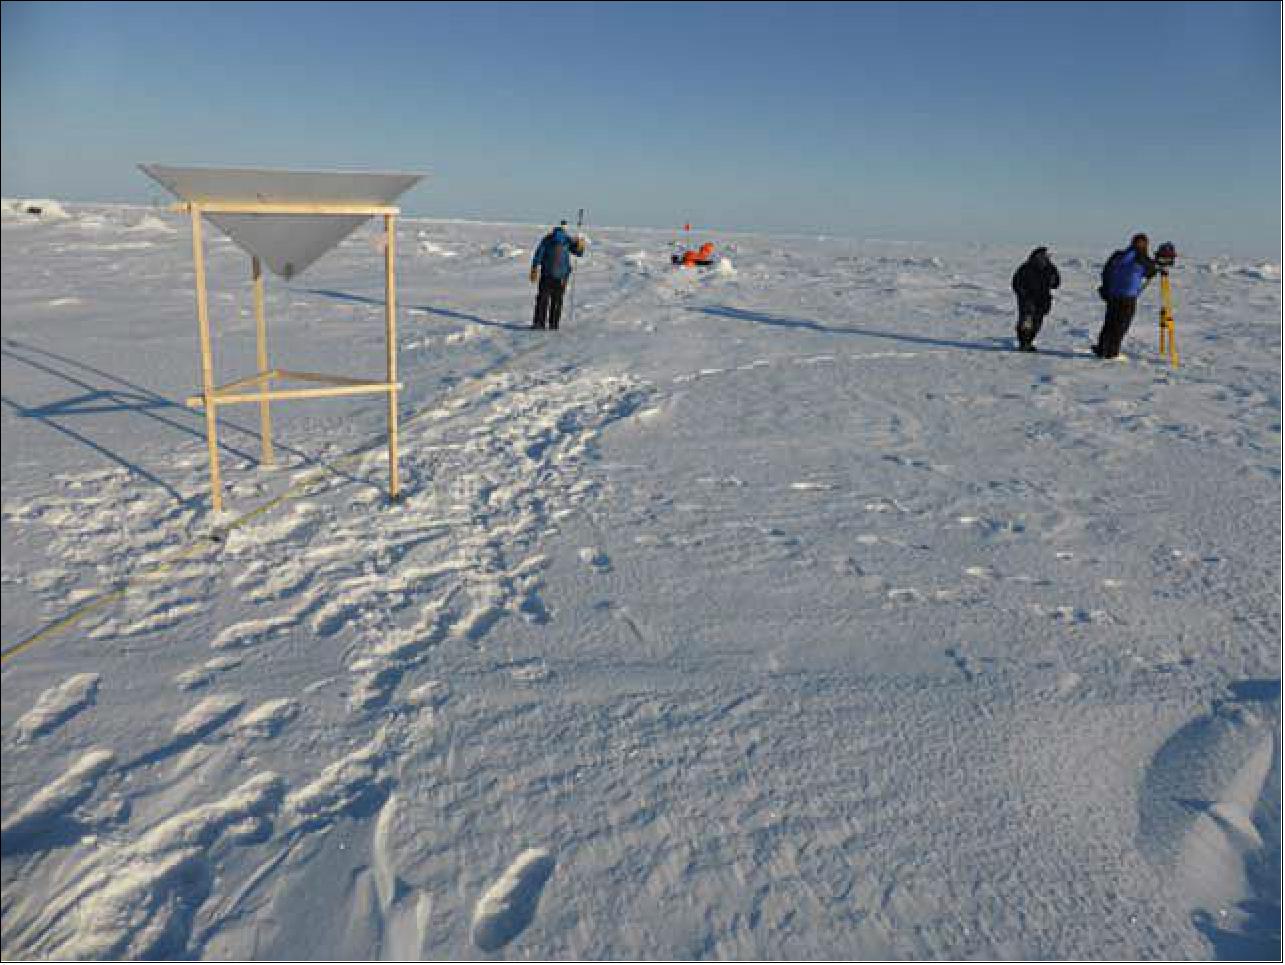 Figure 27: Ground measurements at Camp 2 in the Beaufort Sea. Photo shows Eastern corner reflector, Magnaprobe snow thickness measurement, row of orange garbage bags (background), and terrestrial laser scanner (image credit: YU)